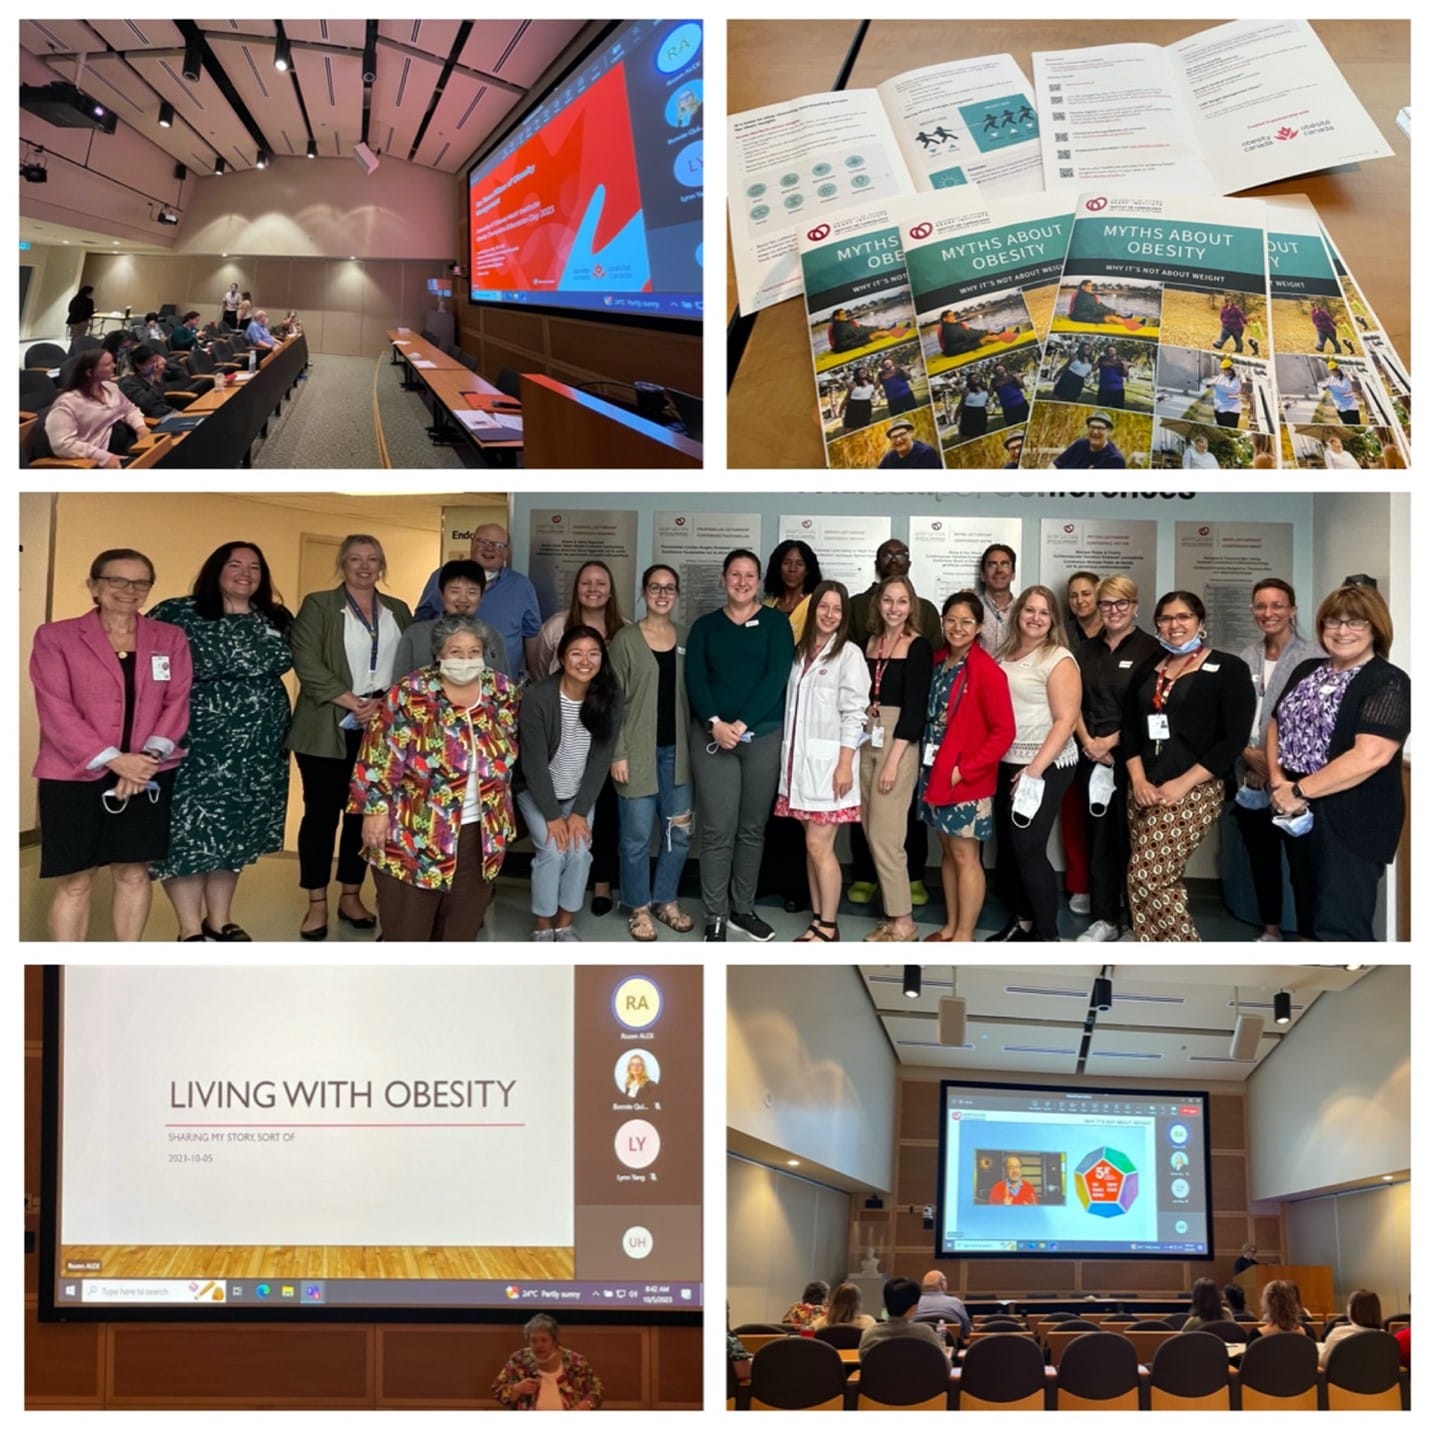 Collage of a professional event, featuring audience in a lecture hall, printed materials on a table, a group of attendees posing for a photo, and a presentation slide titled "living with obesity.